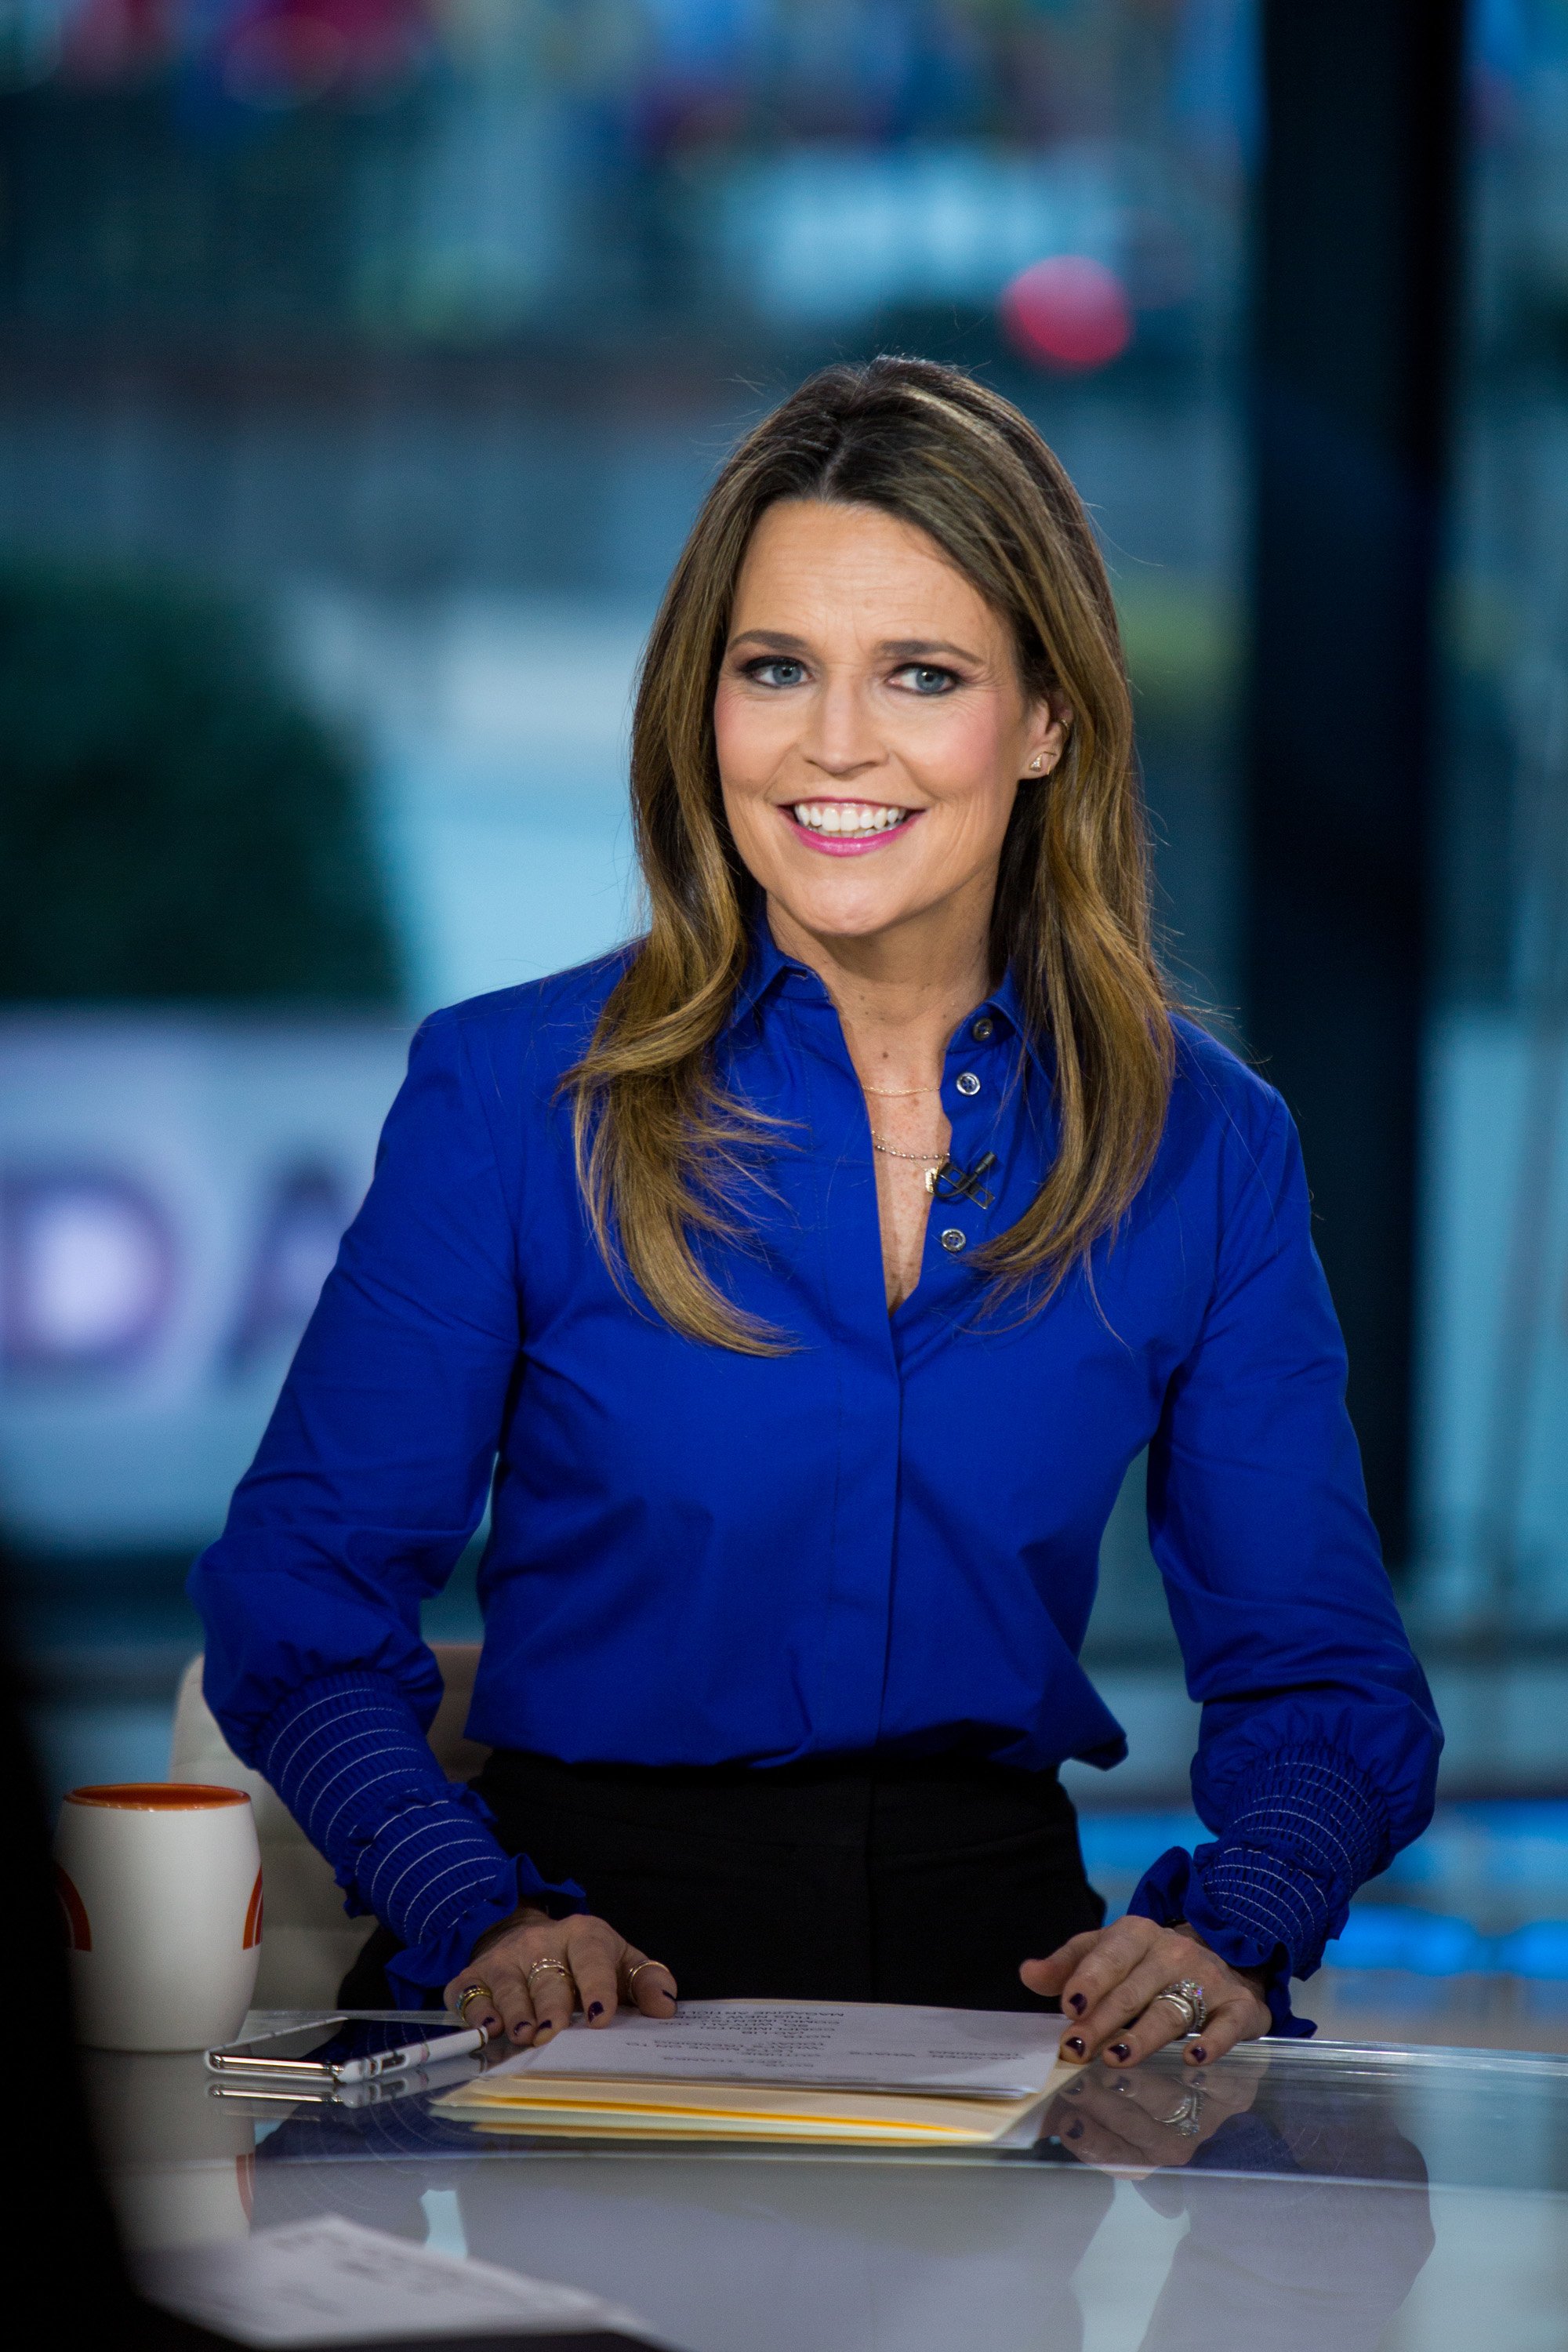 Savannah Guthrie Responds to Critic Who Commented on Her OnAir Hair